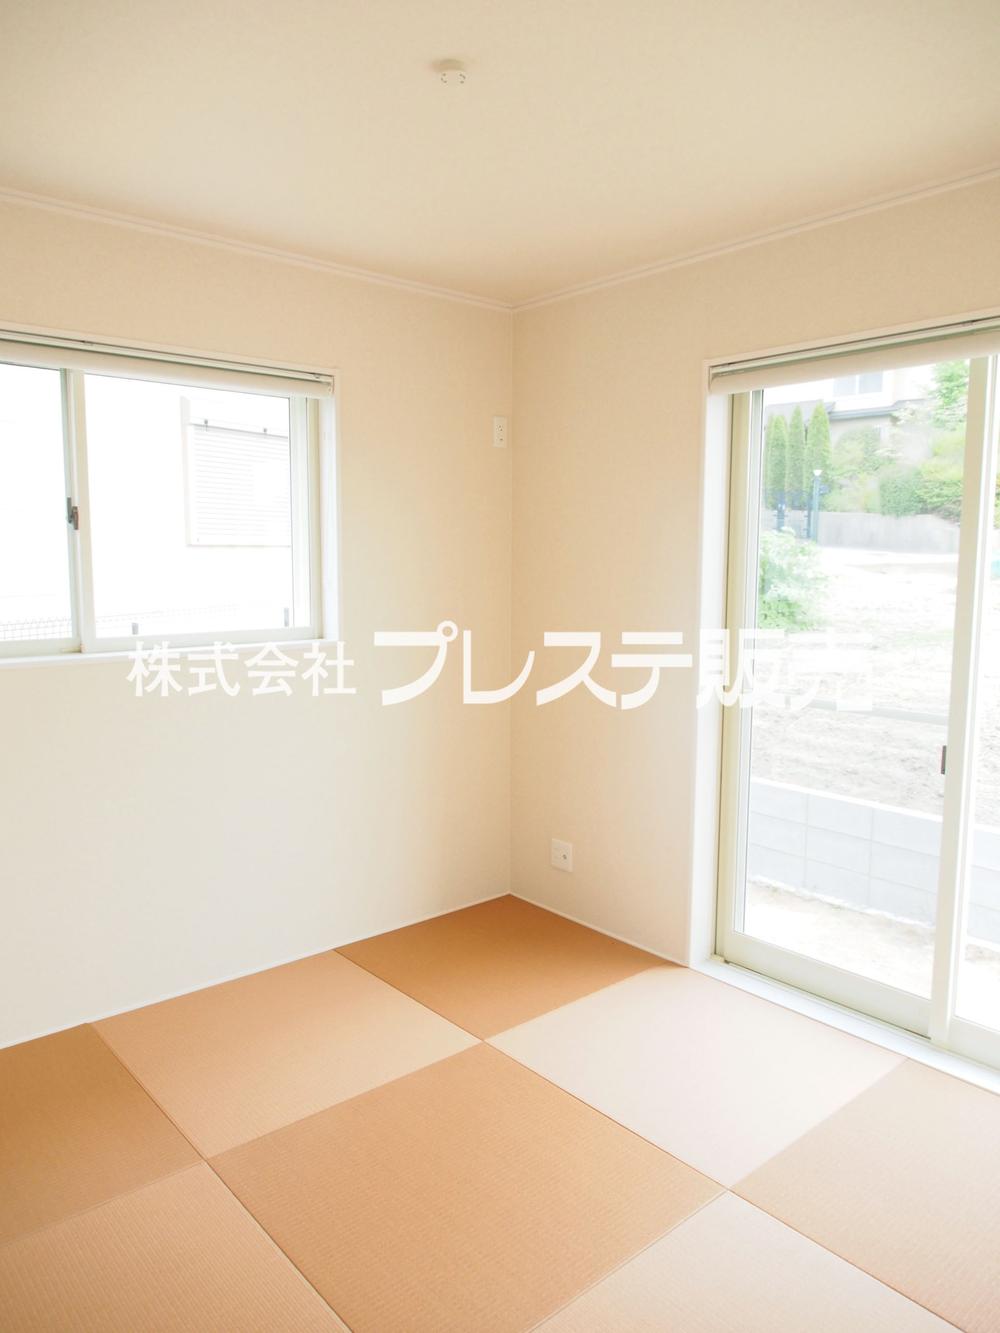 Non-living room. Local photo (B No. land Japanese-style room)